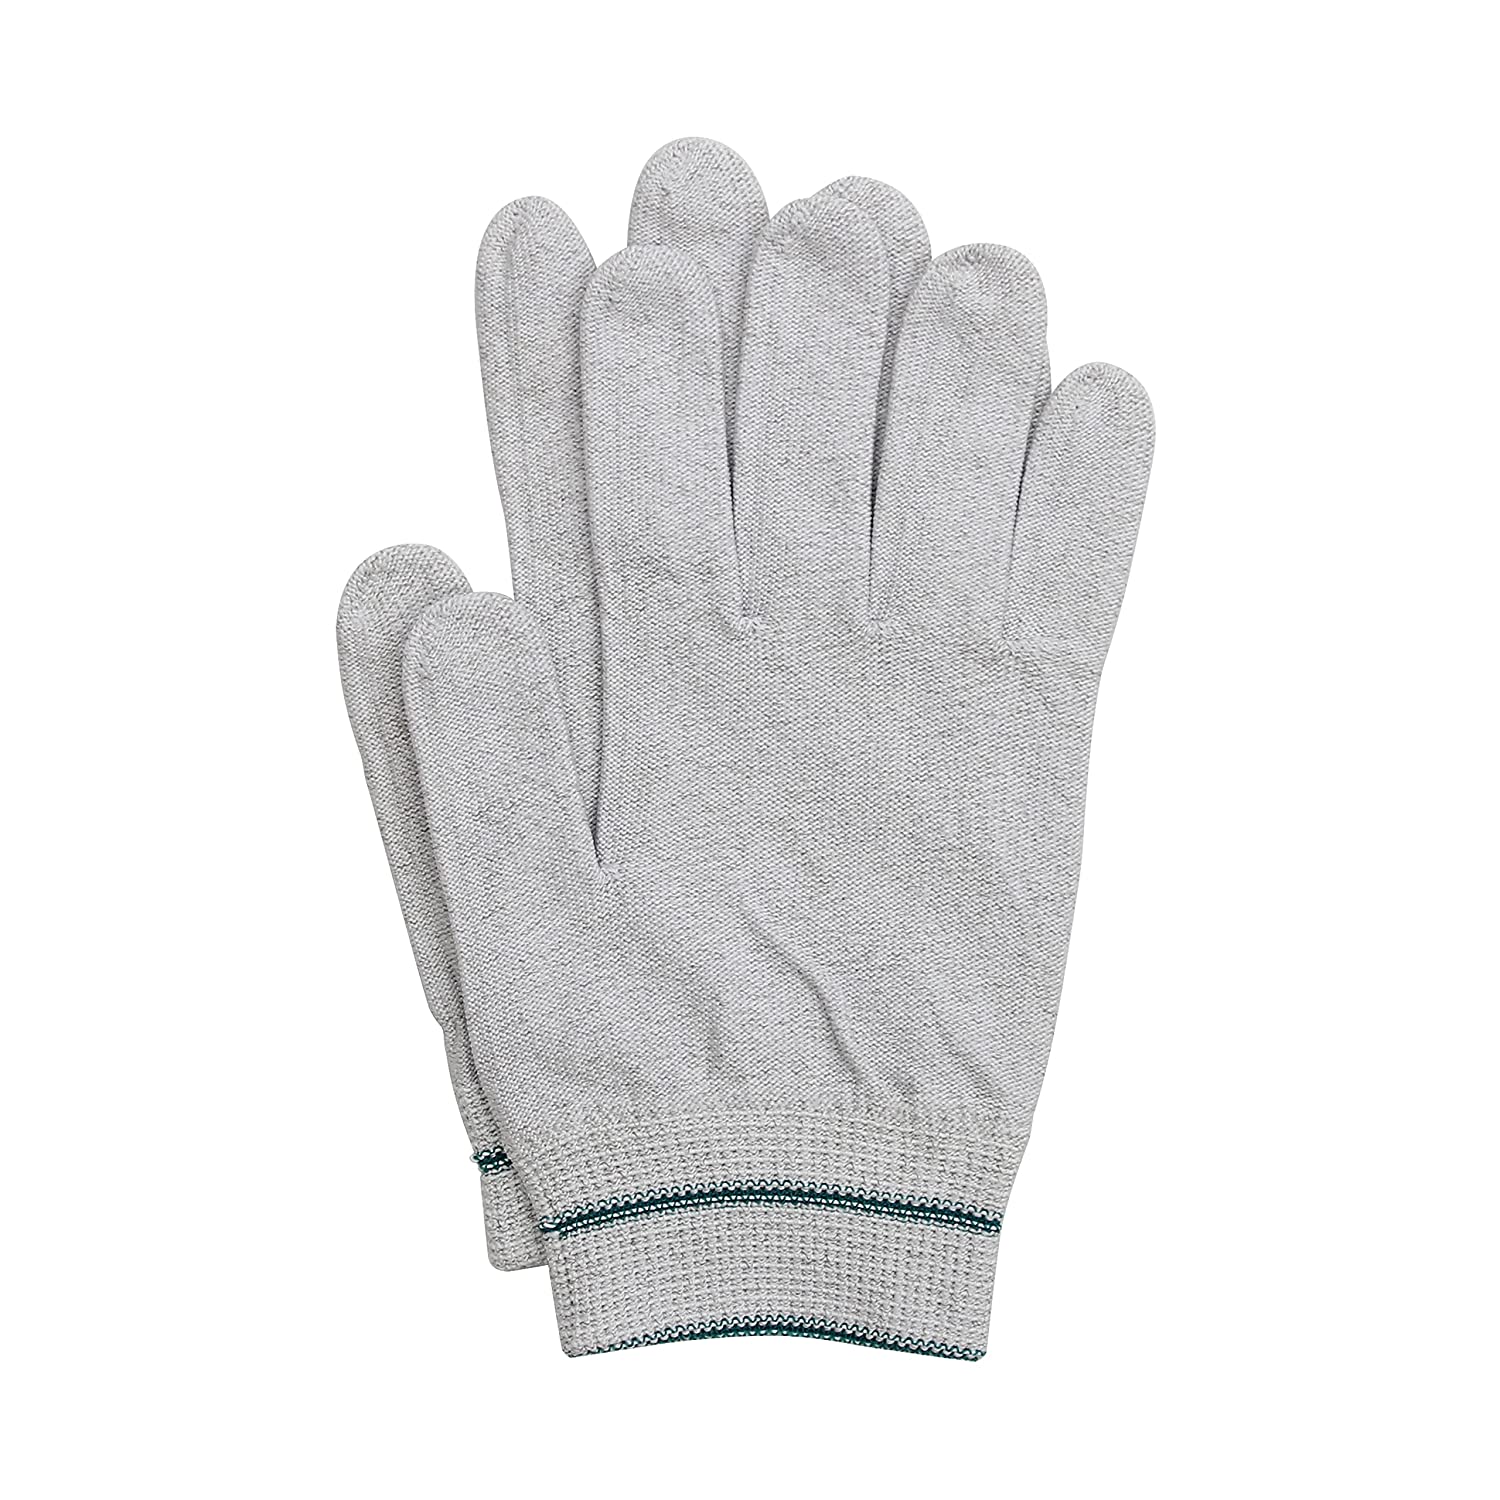 MICROHIGHNESS GLOVE SILVER